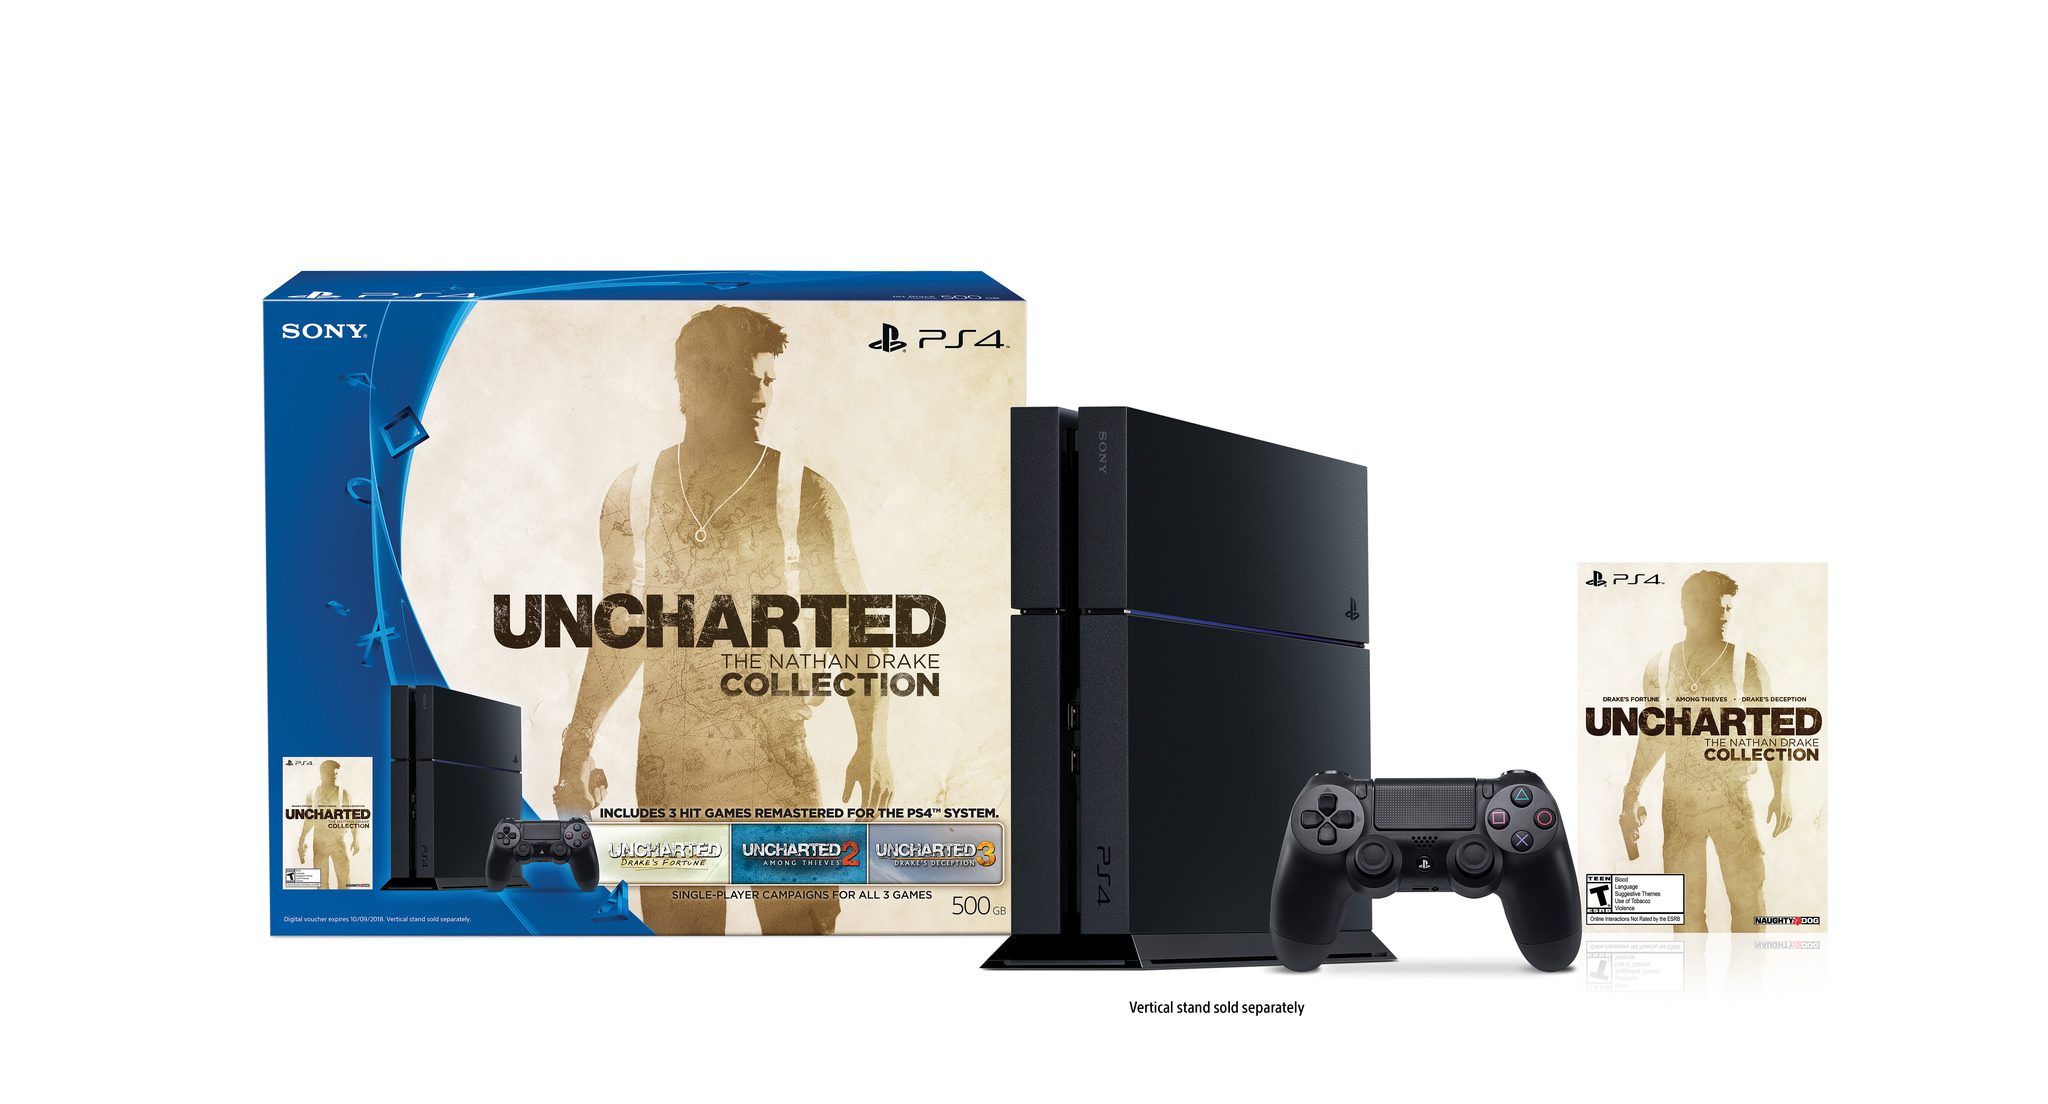 Uncharted трилогия ps4. Uncharted collection ps4. Ps4-299. Анчартед коллекция ps4 что входит. Uncharted collection купить